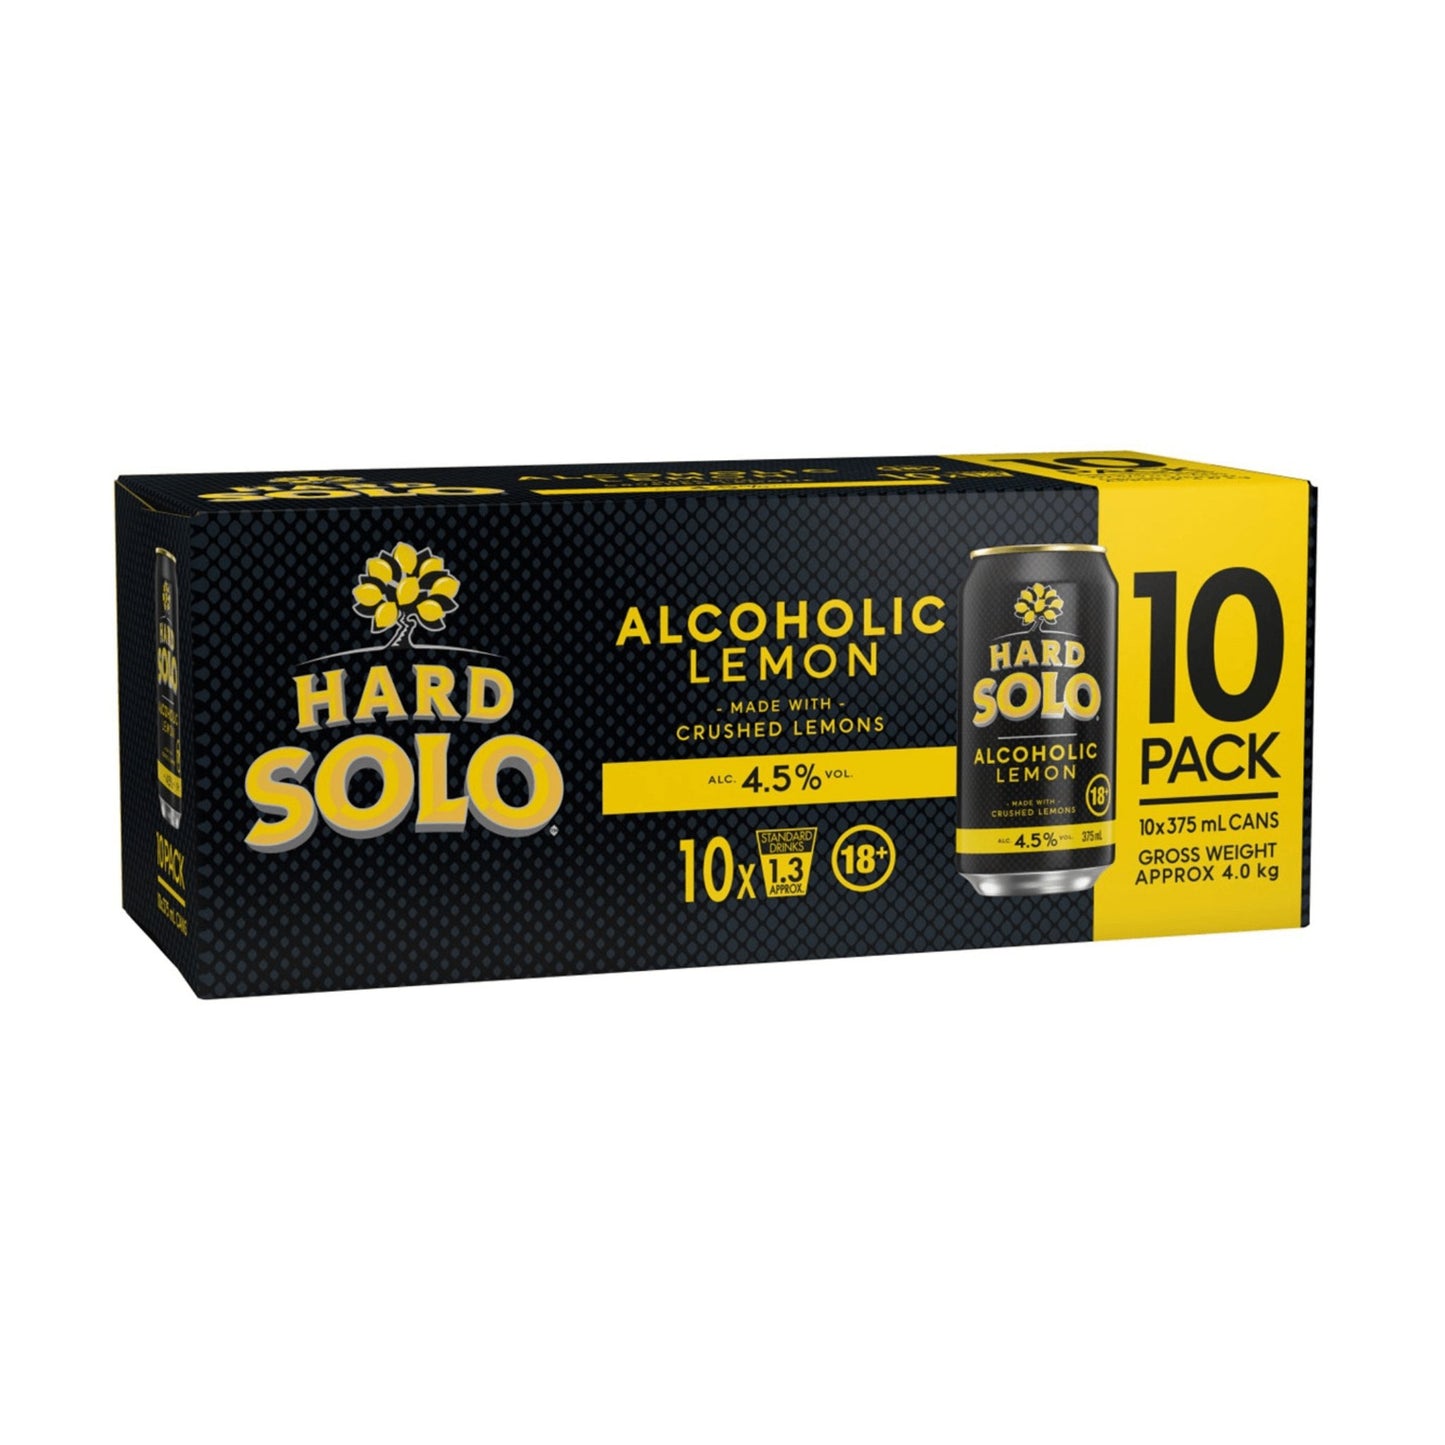 Hard Solo 10 Pack Cans 375ml - Booze House